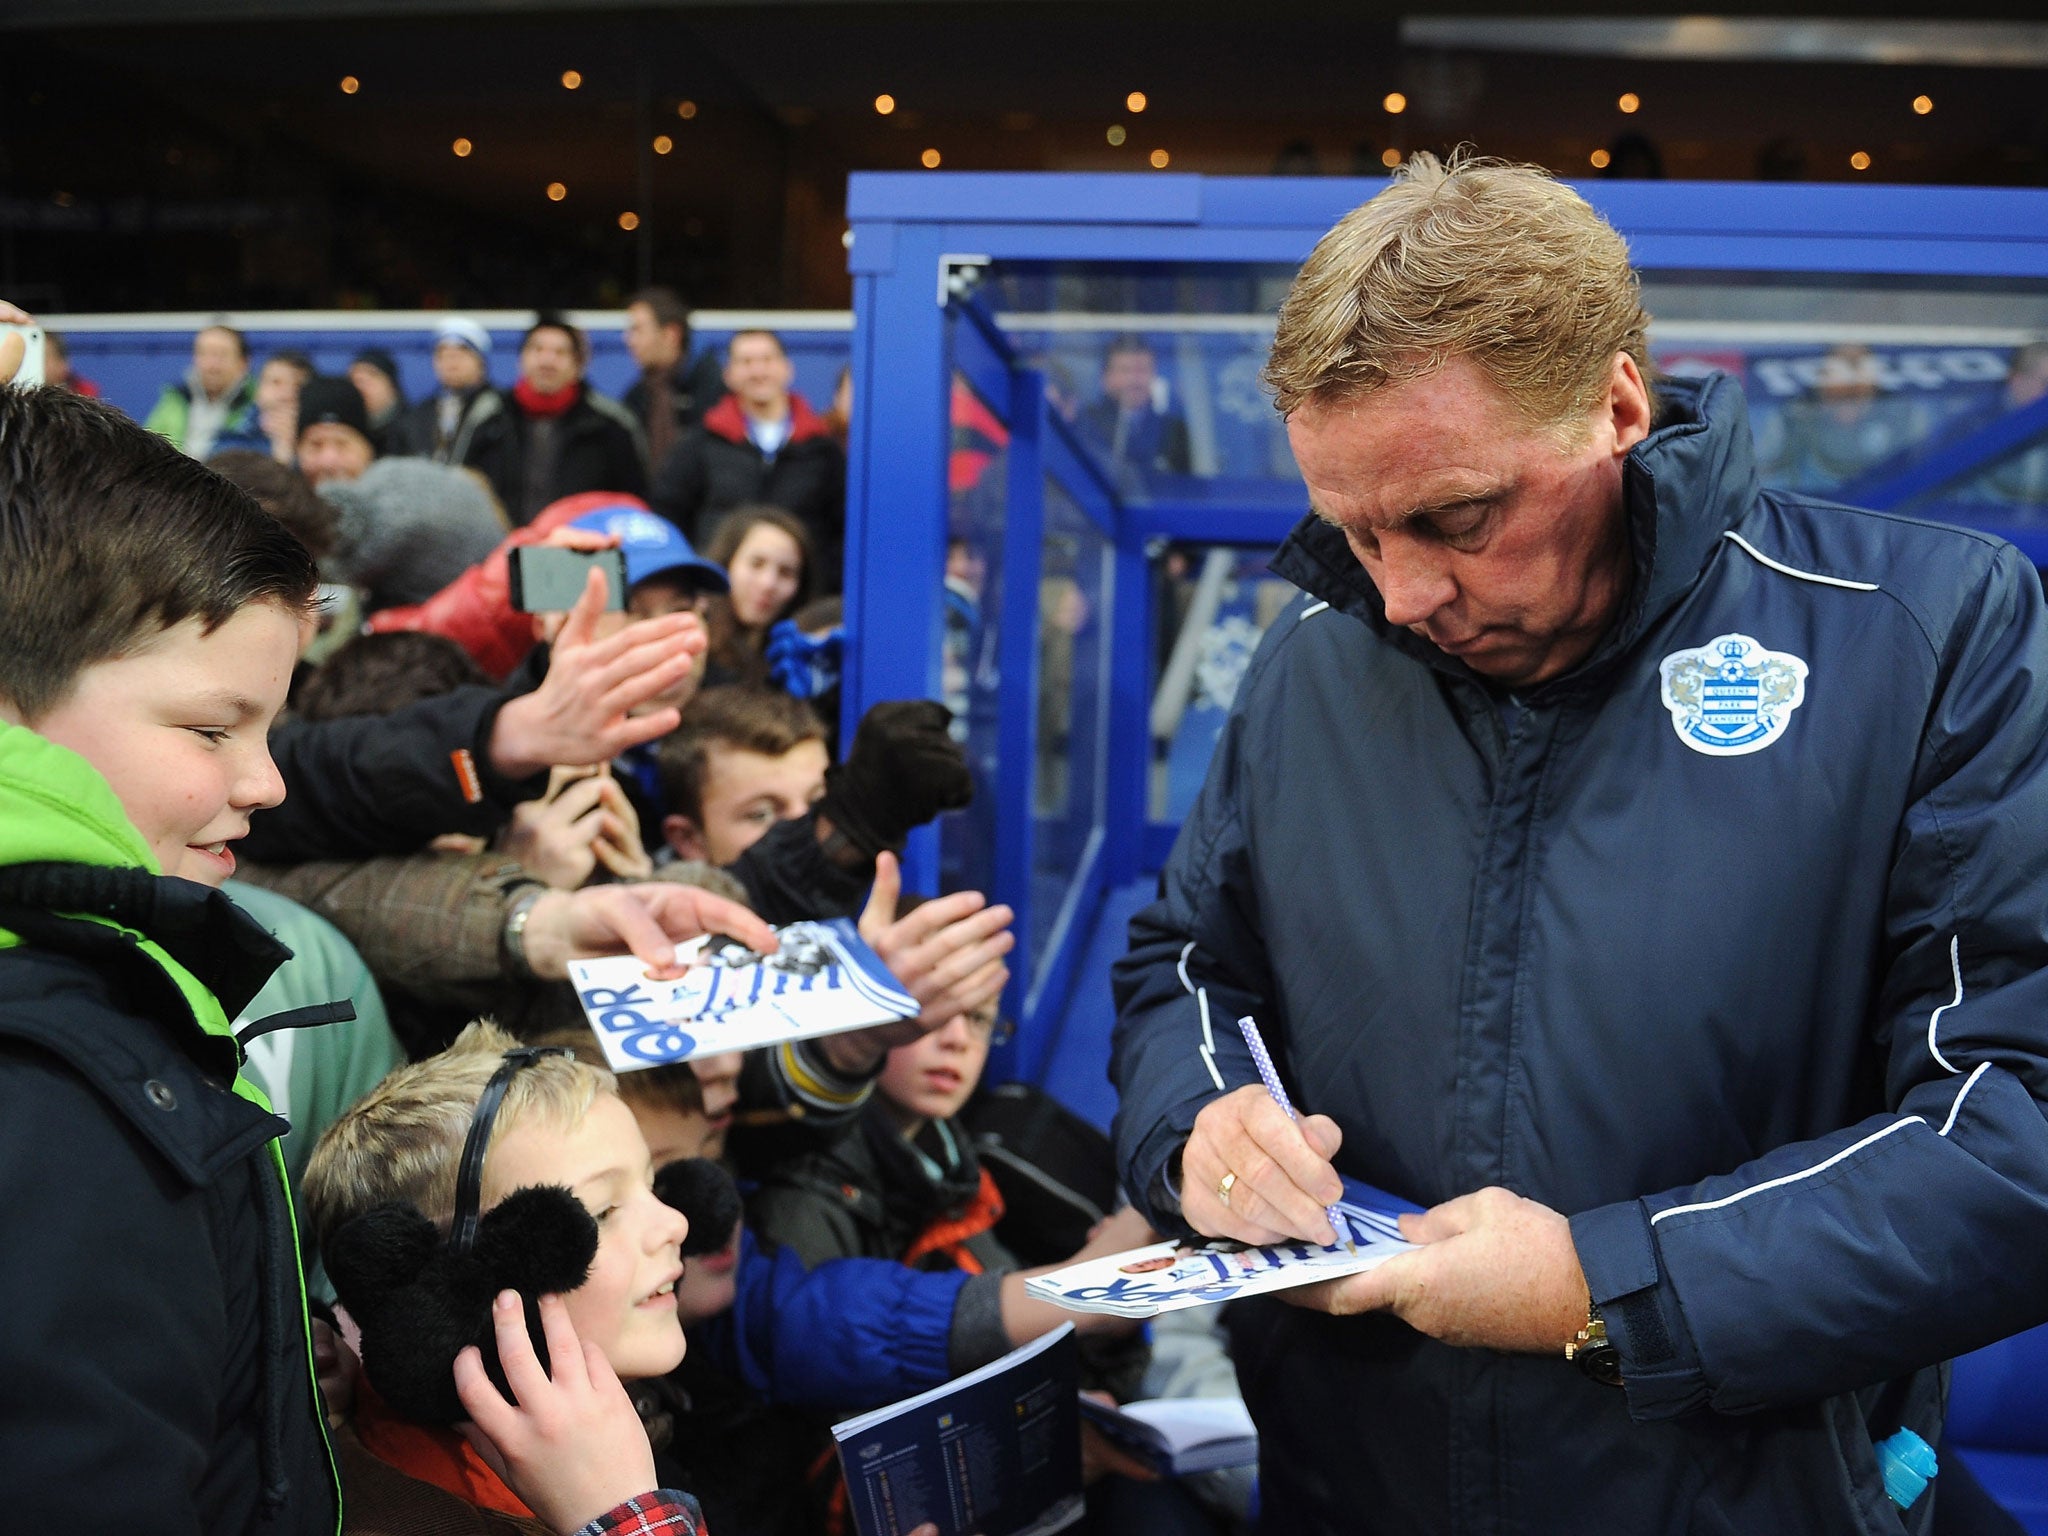 On me pad! Harry Redknapp shows off his penmanship